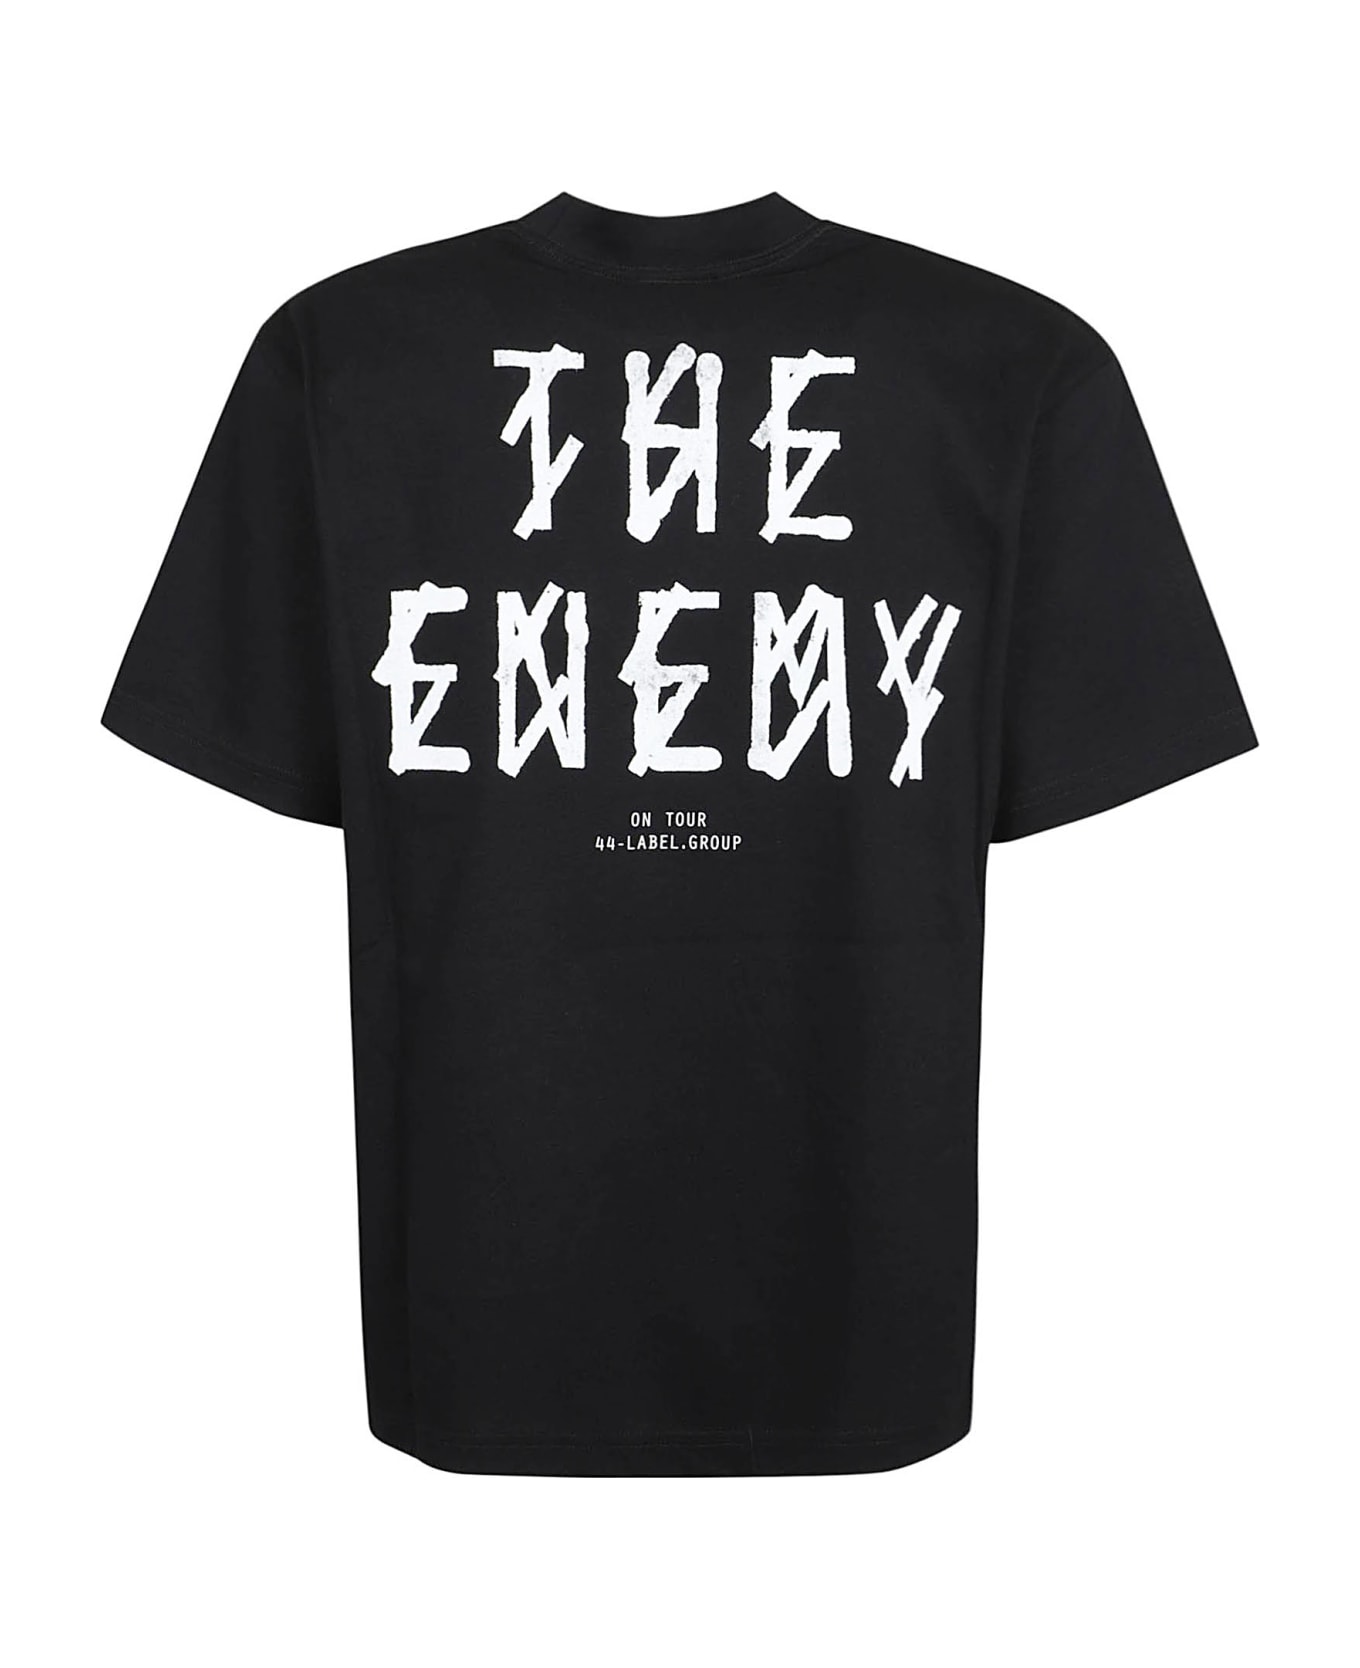 44 Label Group Classic Tee - Black The Enemy Print